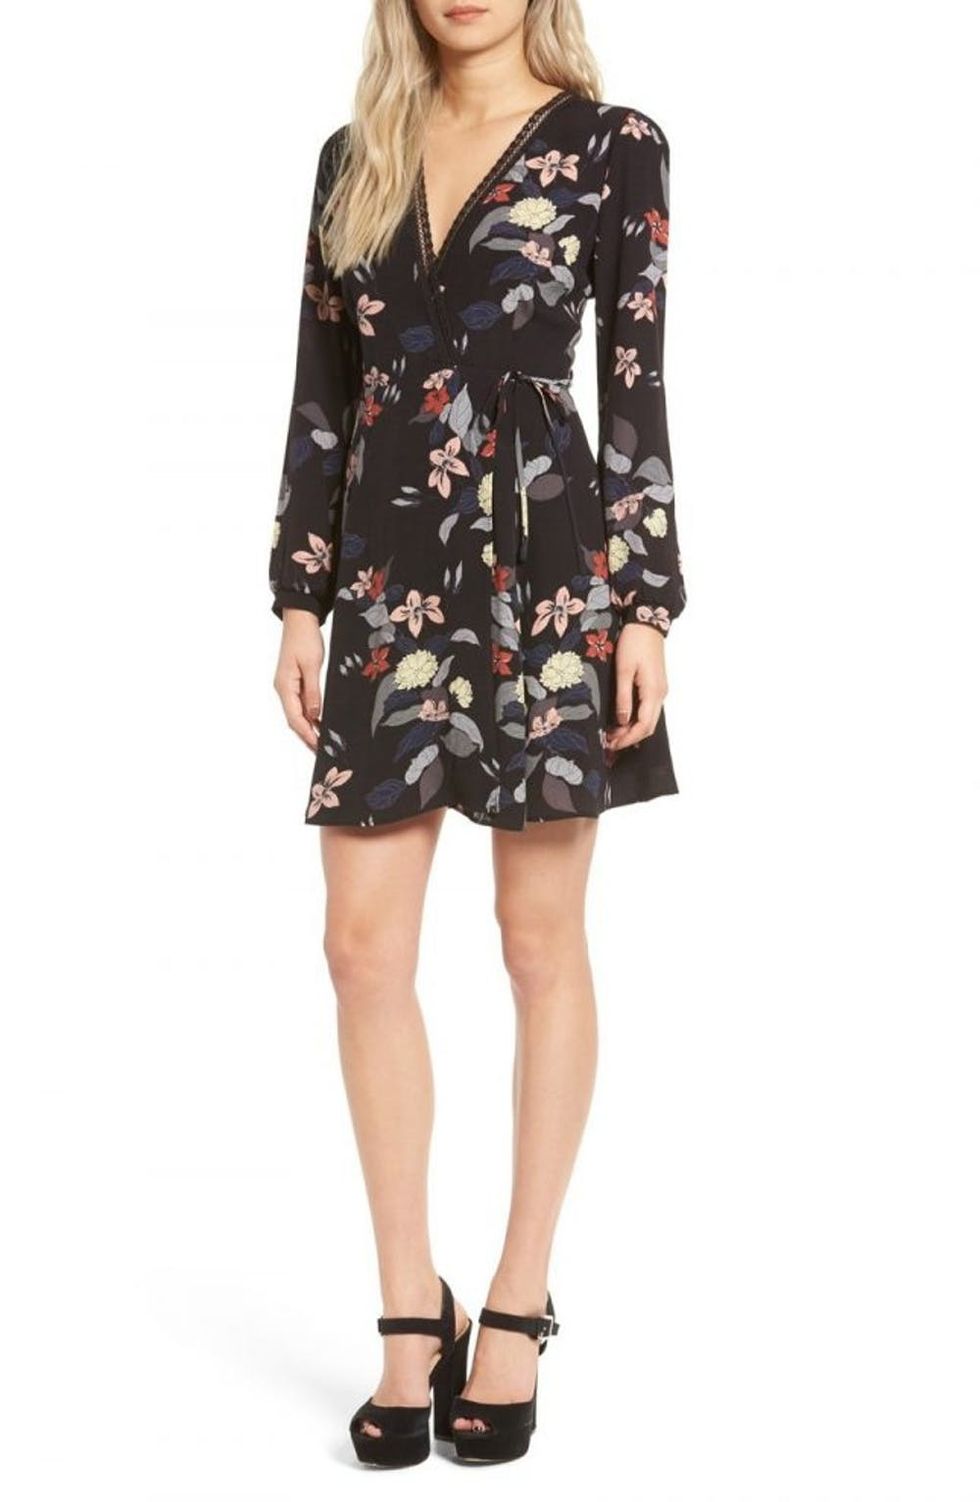 10 Duchess Kate-Worthy Winter Floral Dresses to Wear Now - Brit + Co